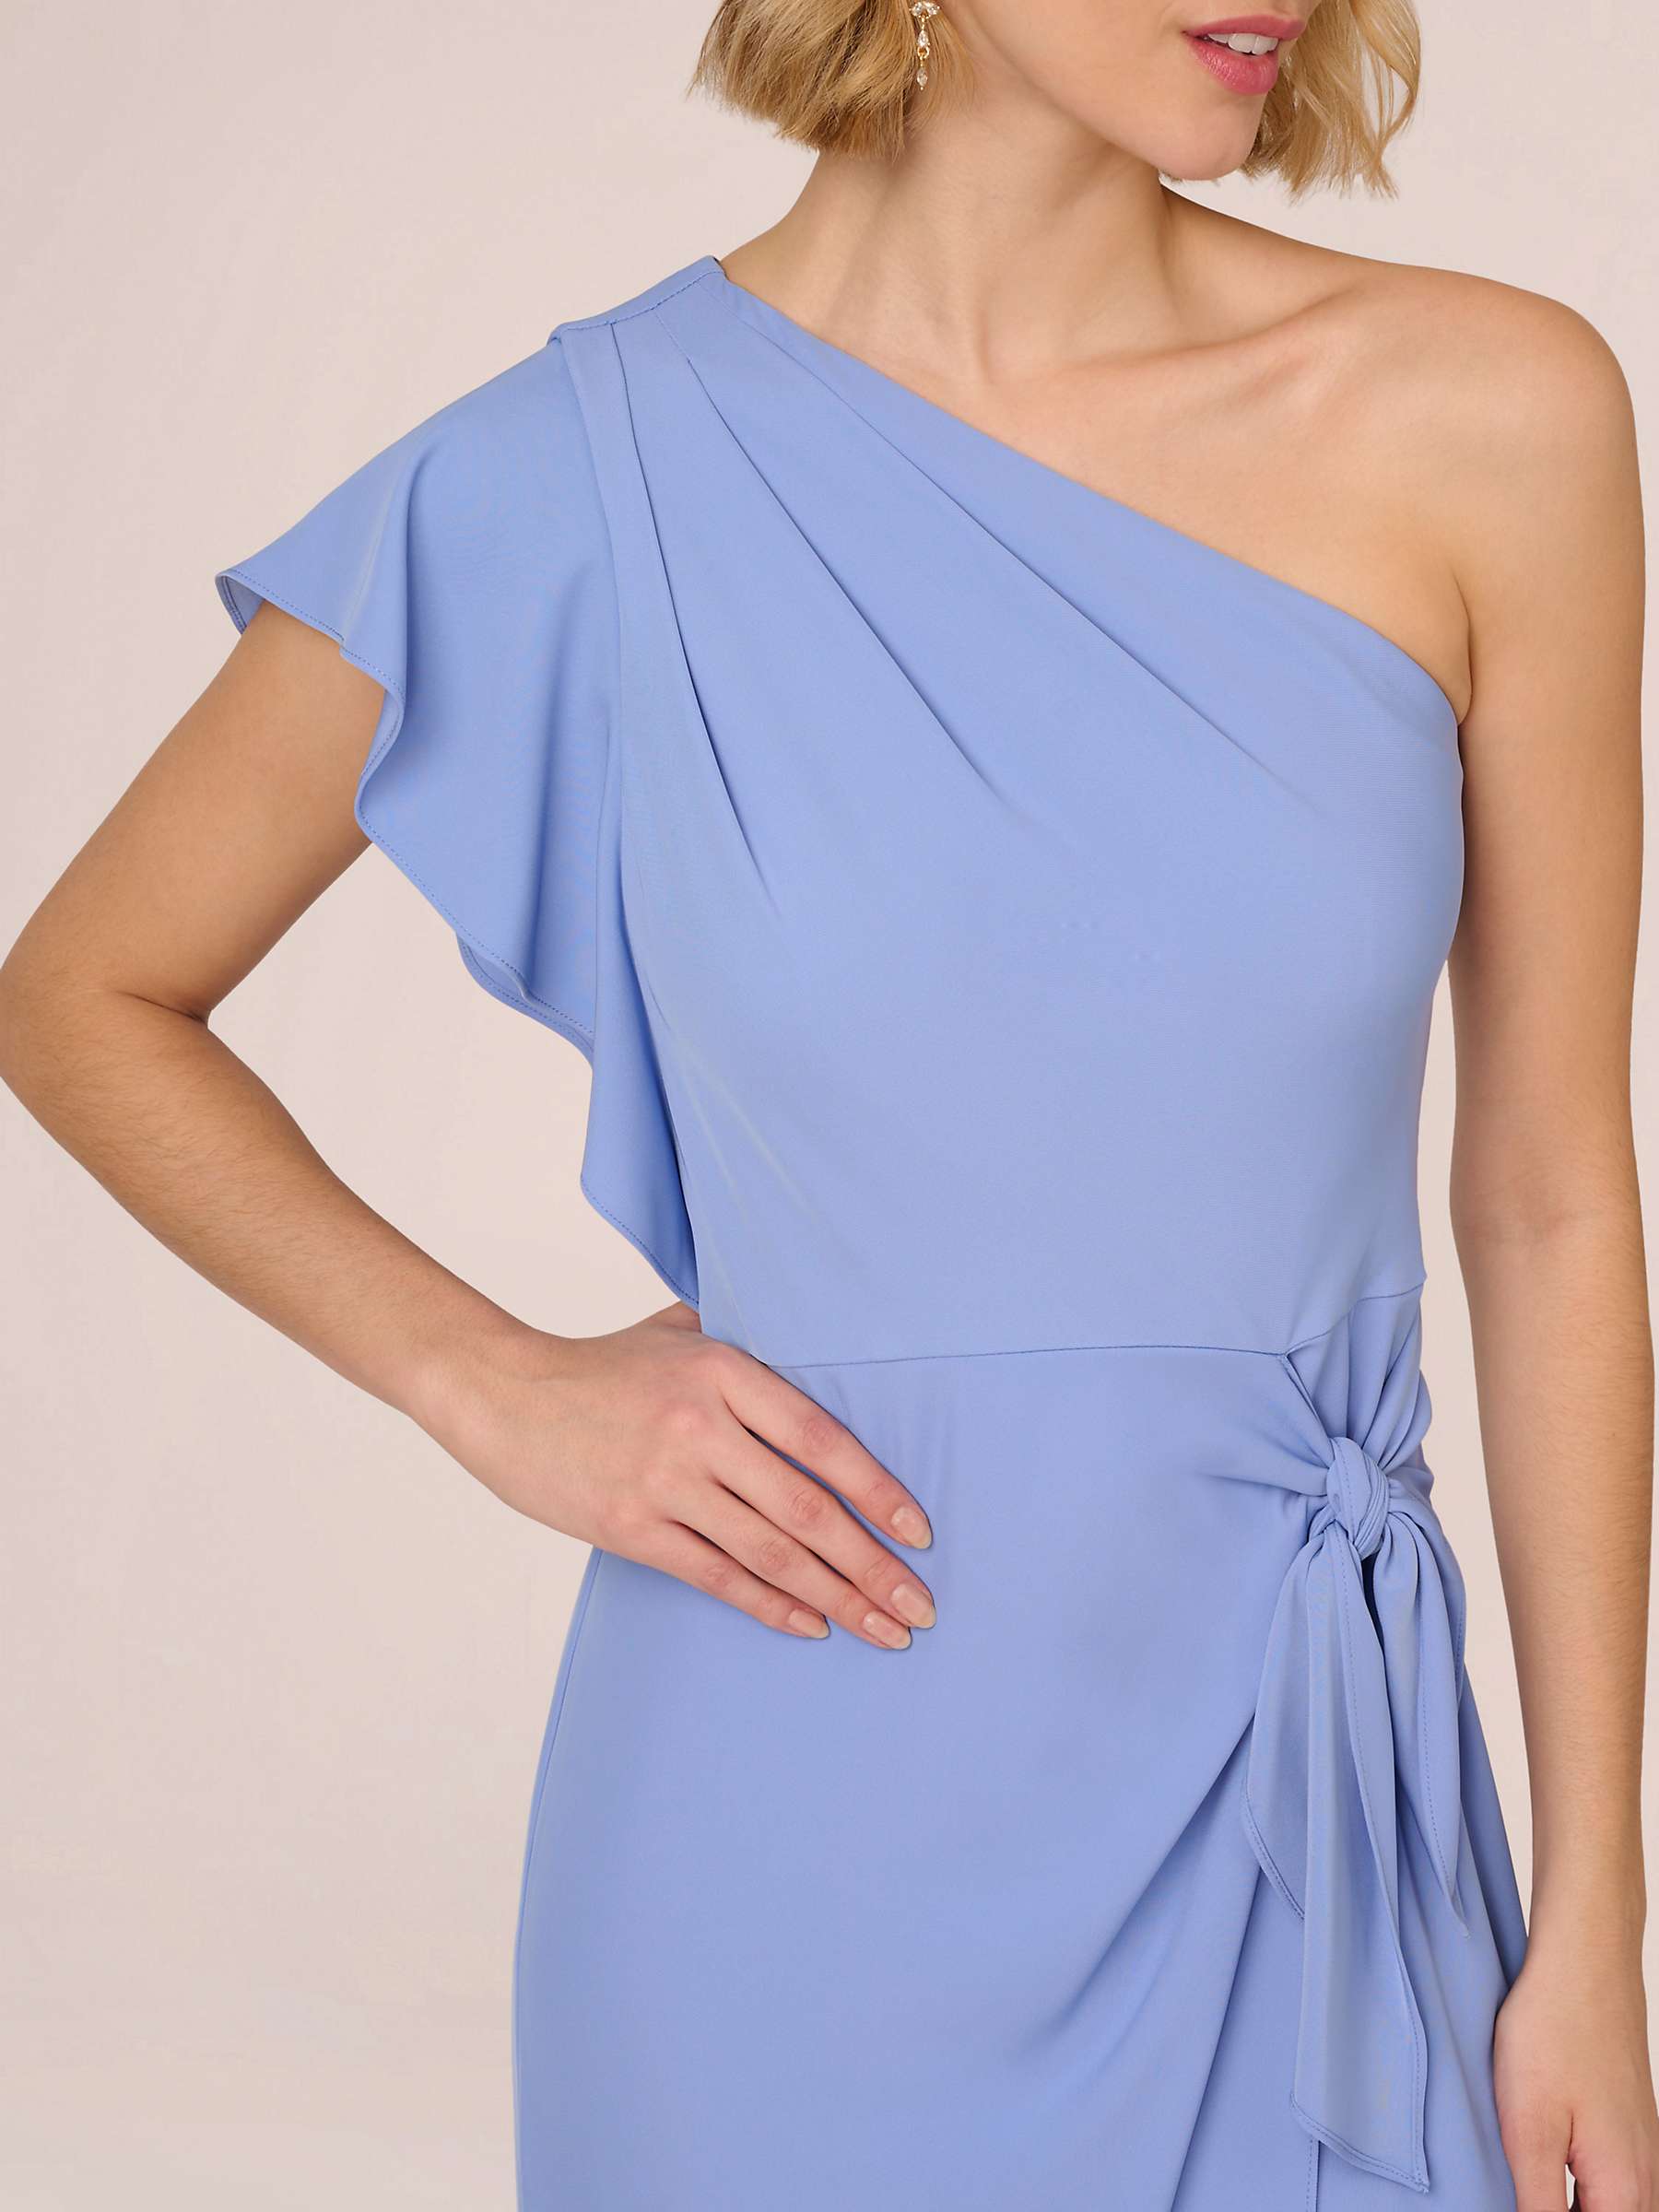 Buy Adrianna Papell One Shoulder Maxi Dress, Peri Cruise Online at johnlewis.com